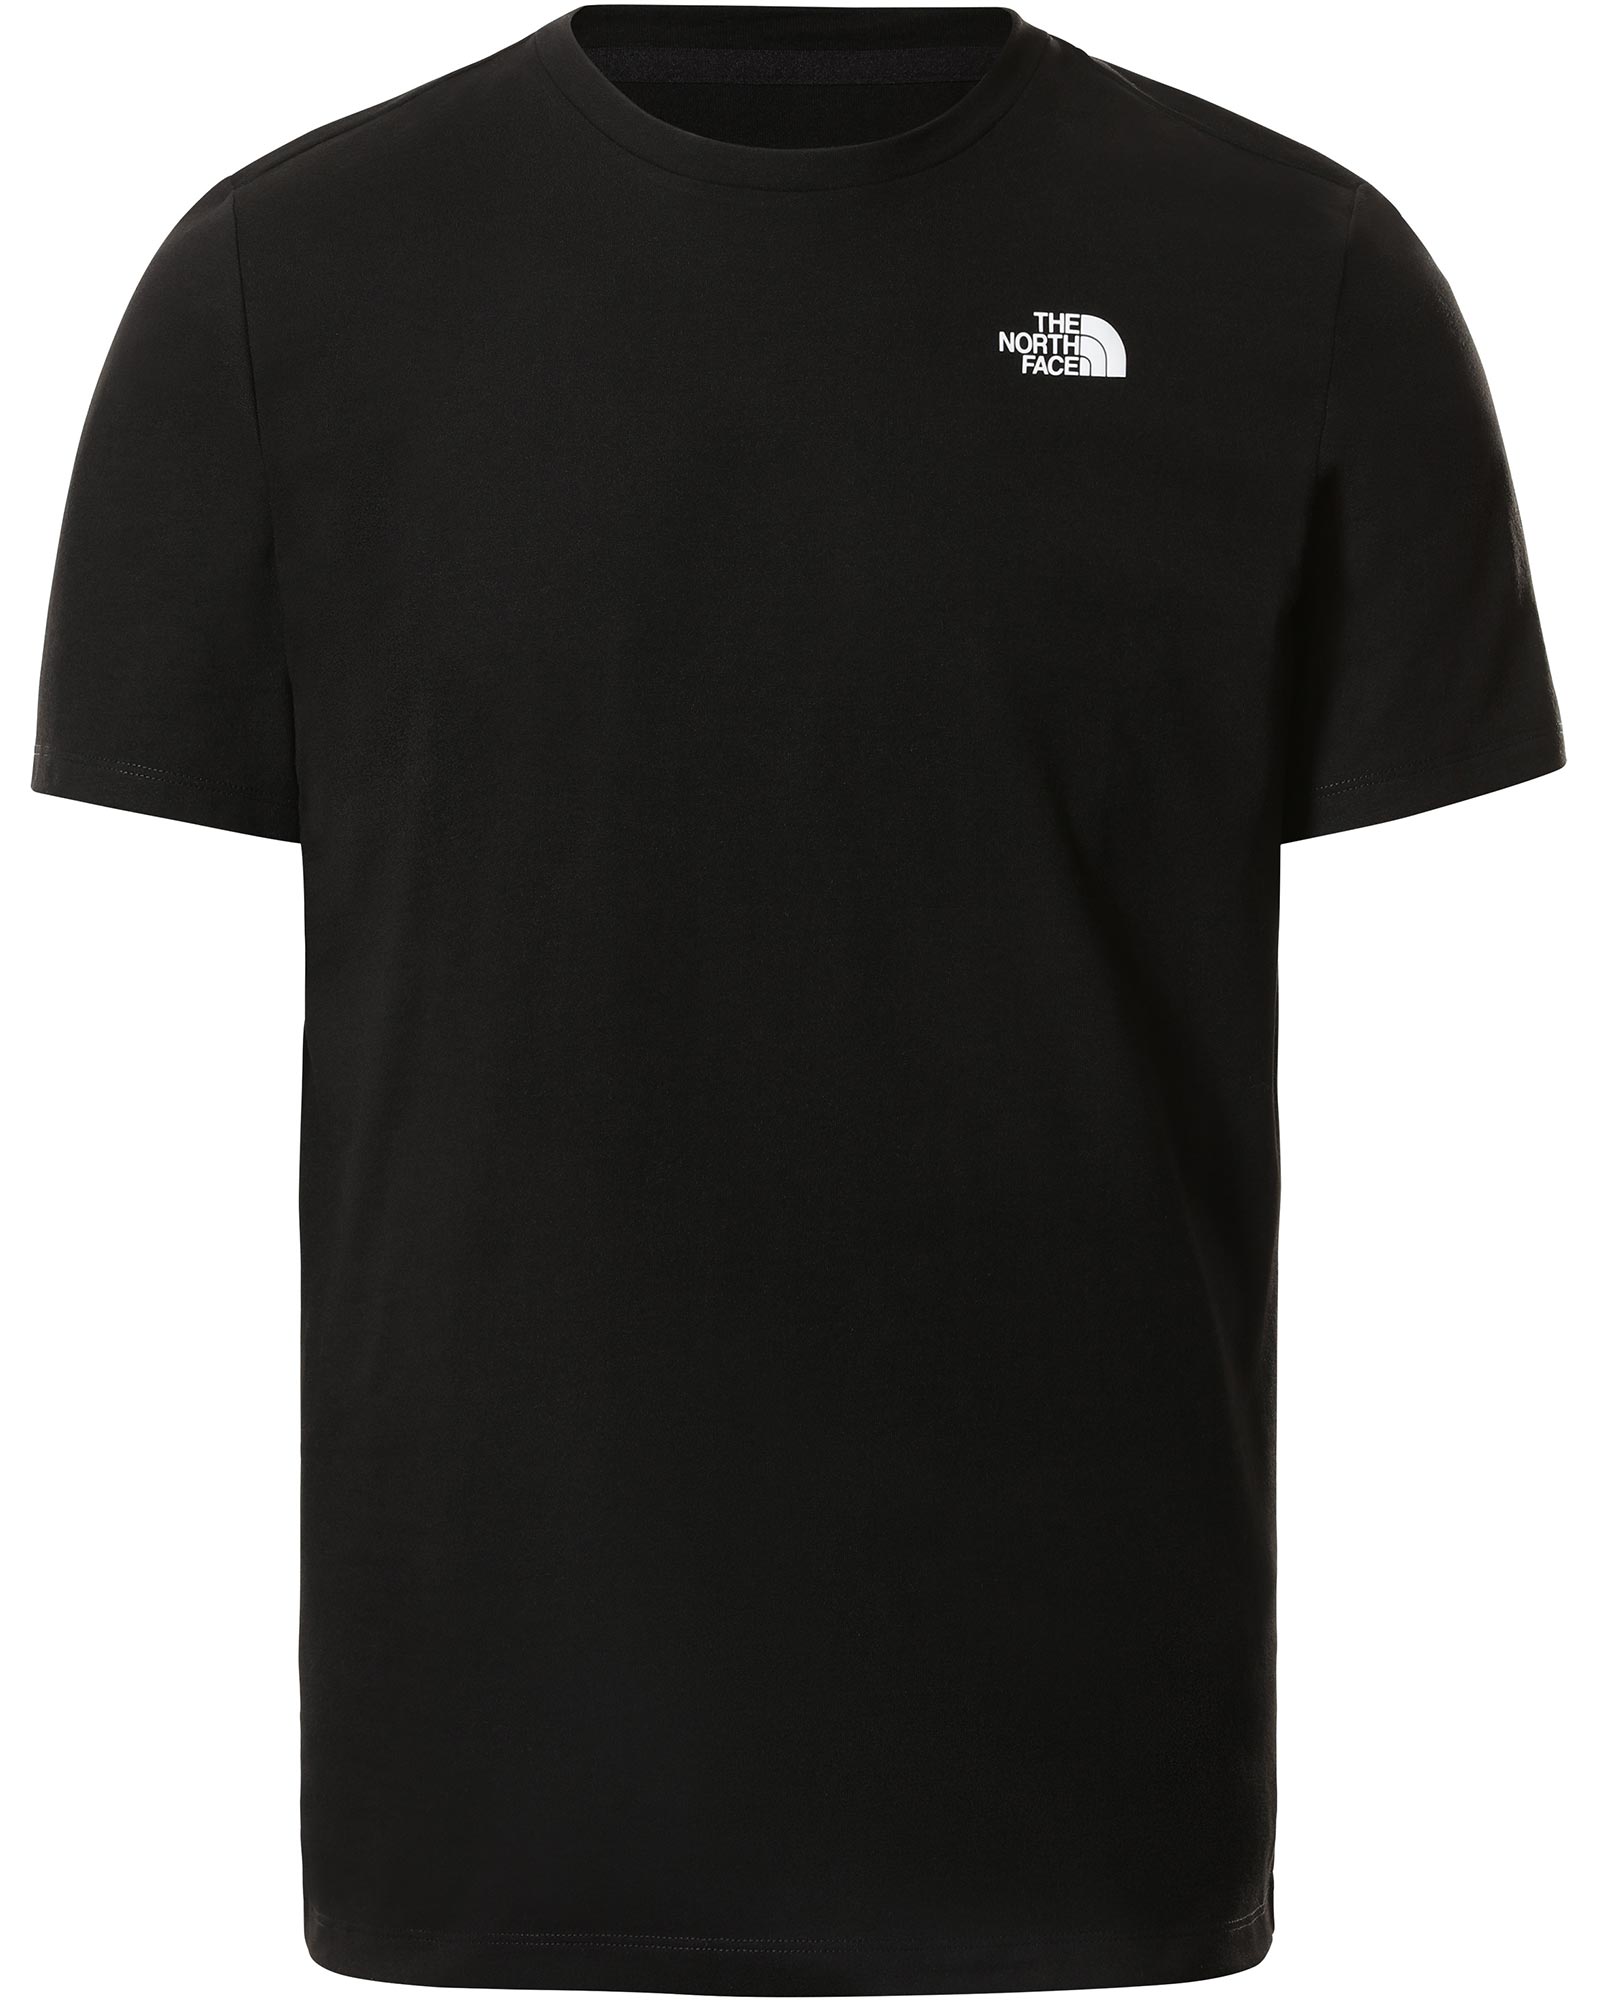 Product image of The North Face Foundation Men's T-Shirt